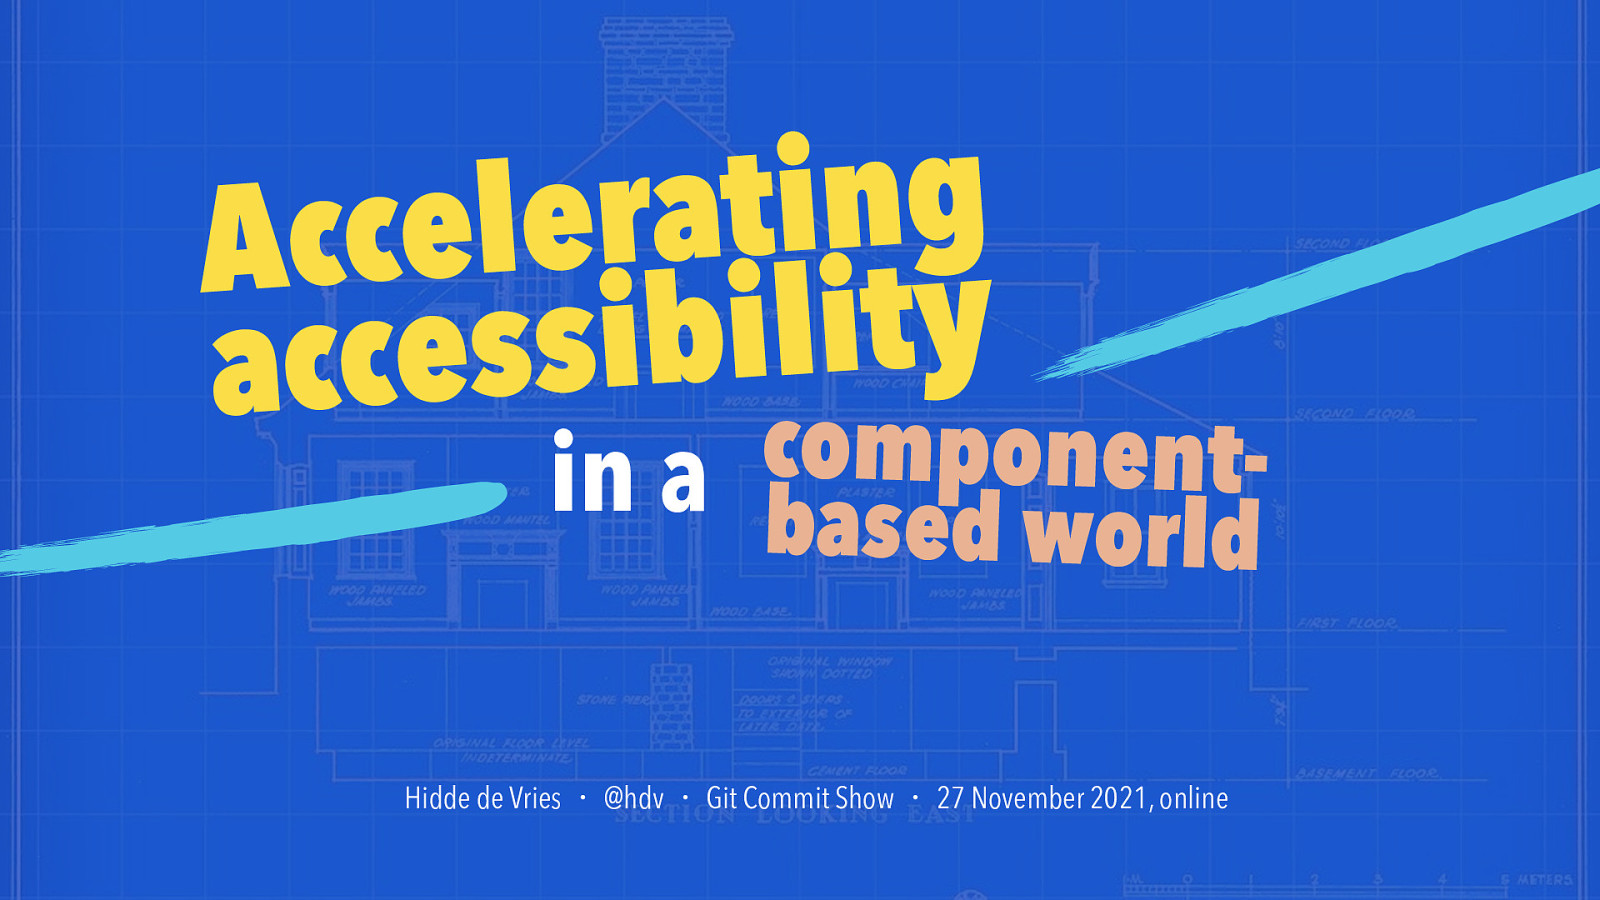 Accelerating accessibility in a component-based world